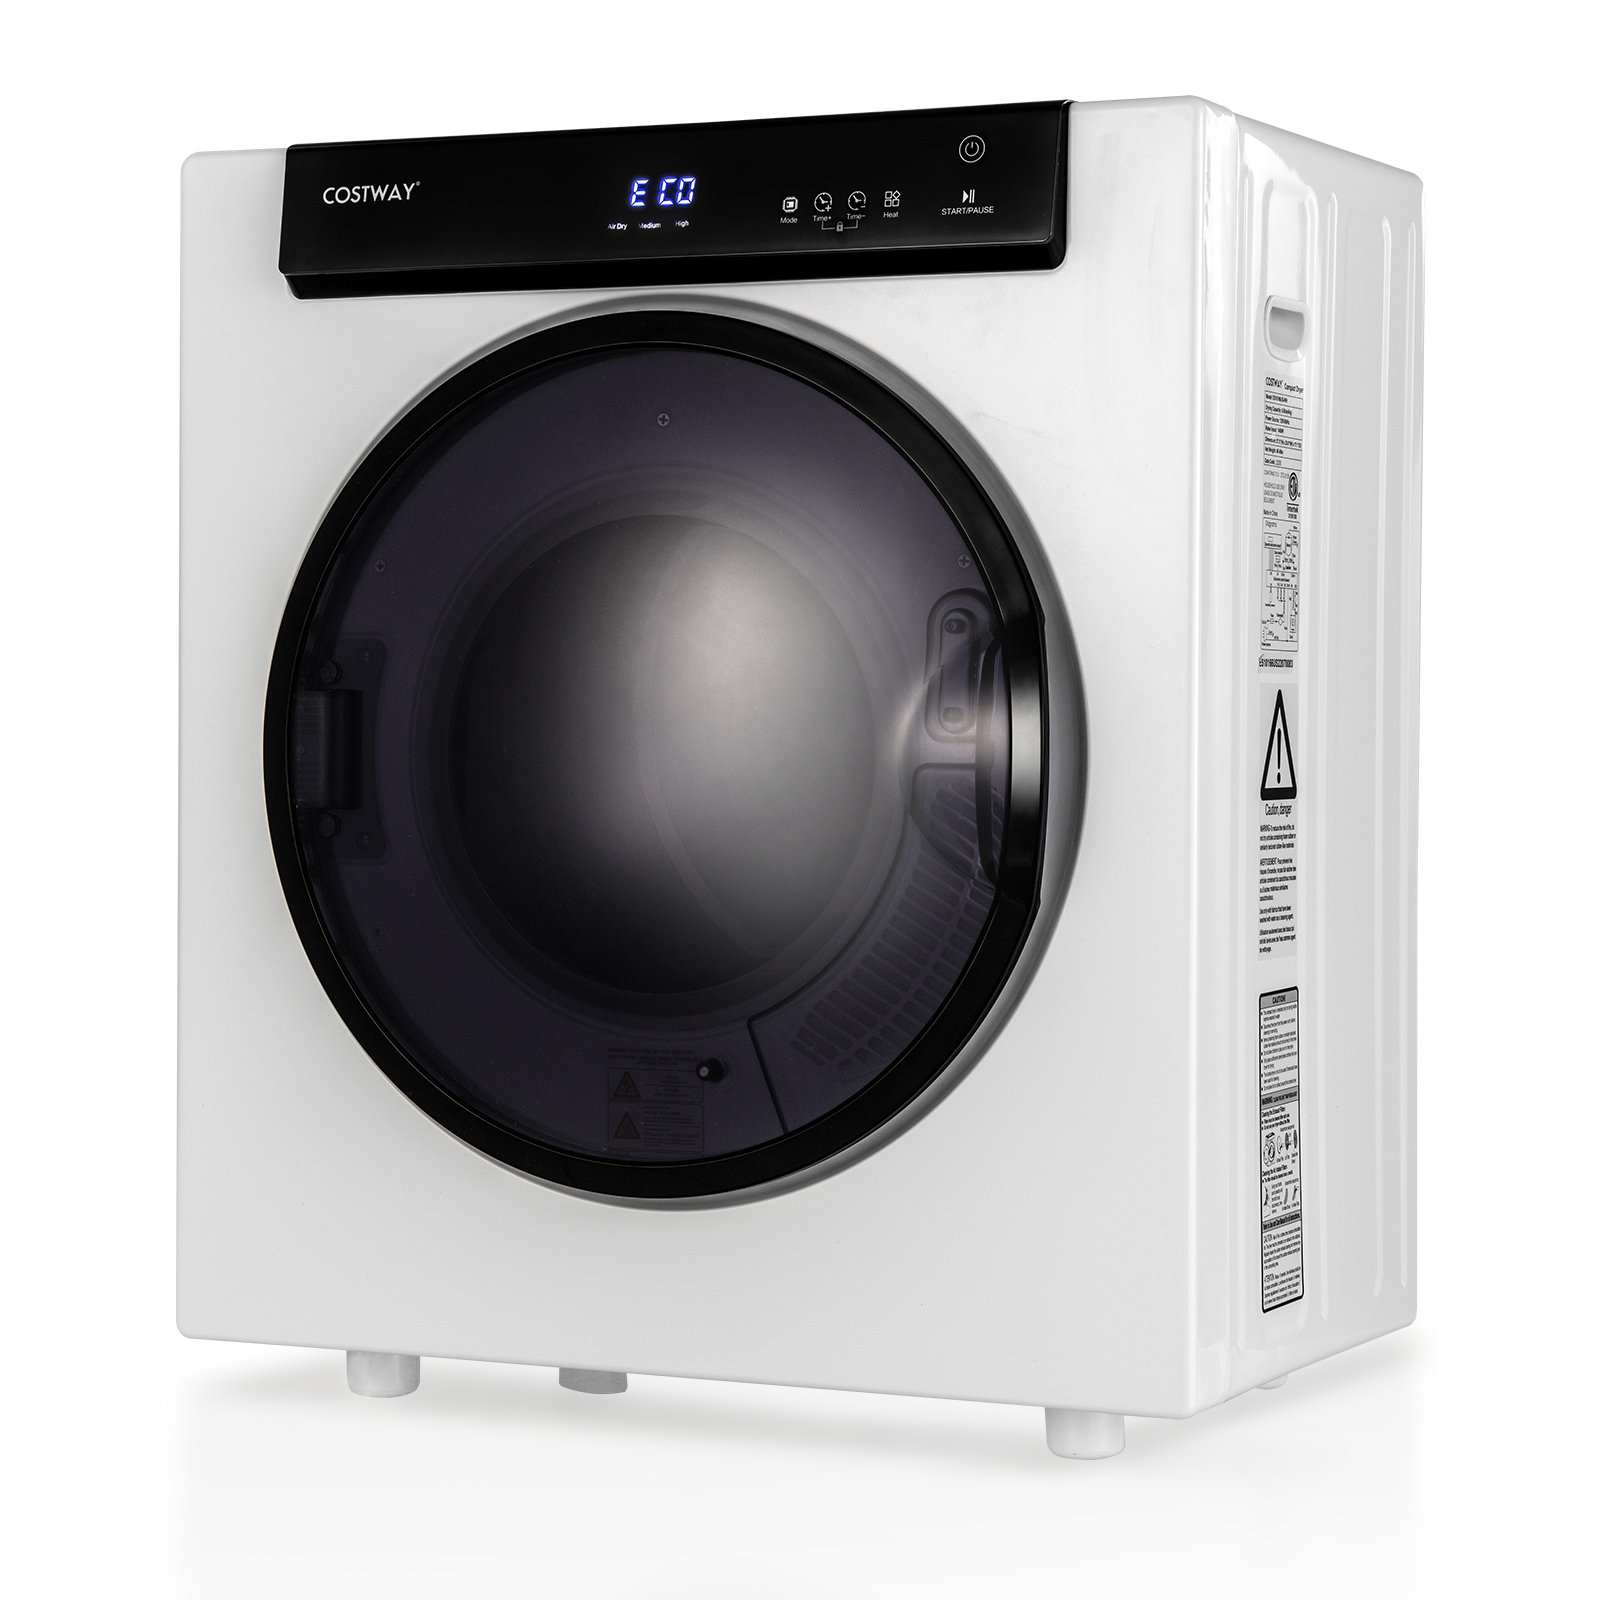 This is the PANDA 3.6 CU. FT.PORTABLE DRYER yes: you can fit a